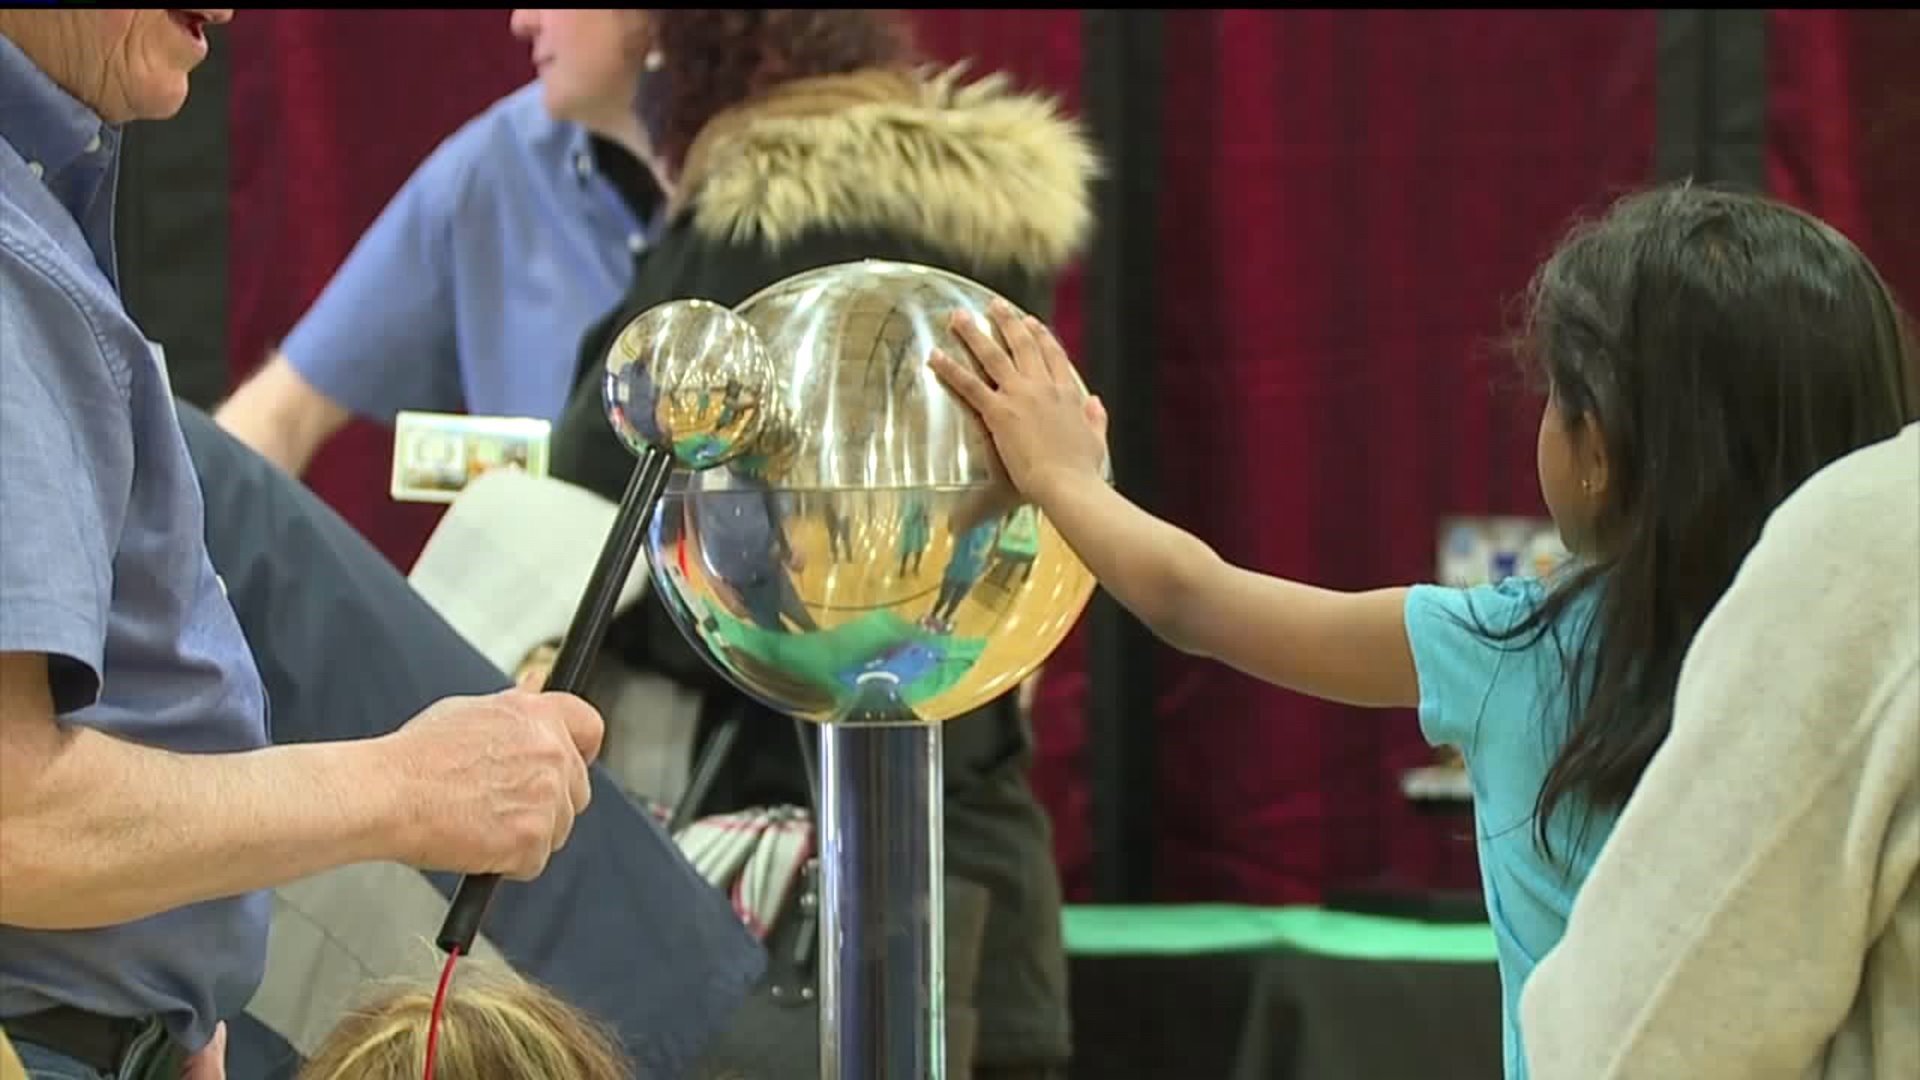 Bettendorf school district hosts "STEM expo" to introduce kids to science fields